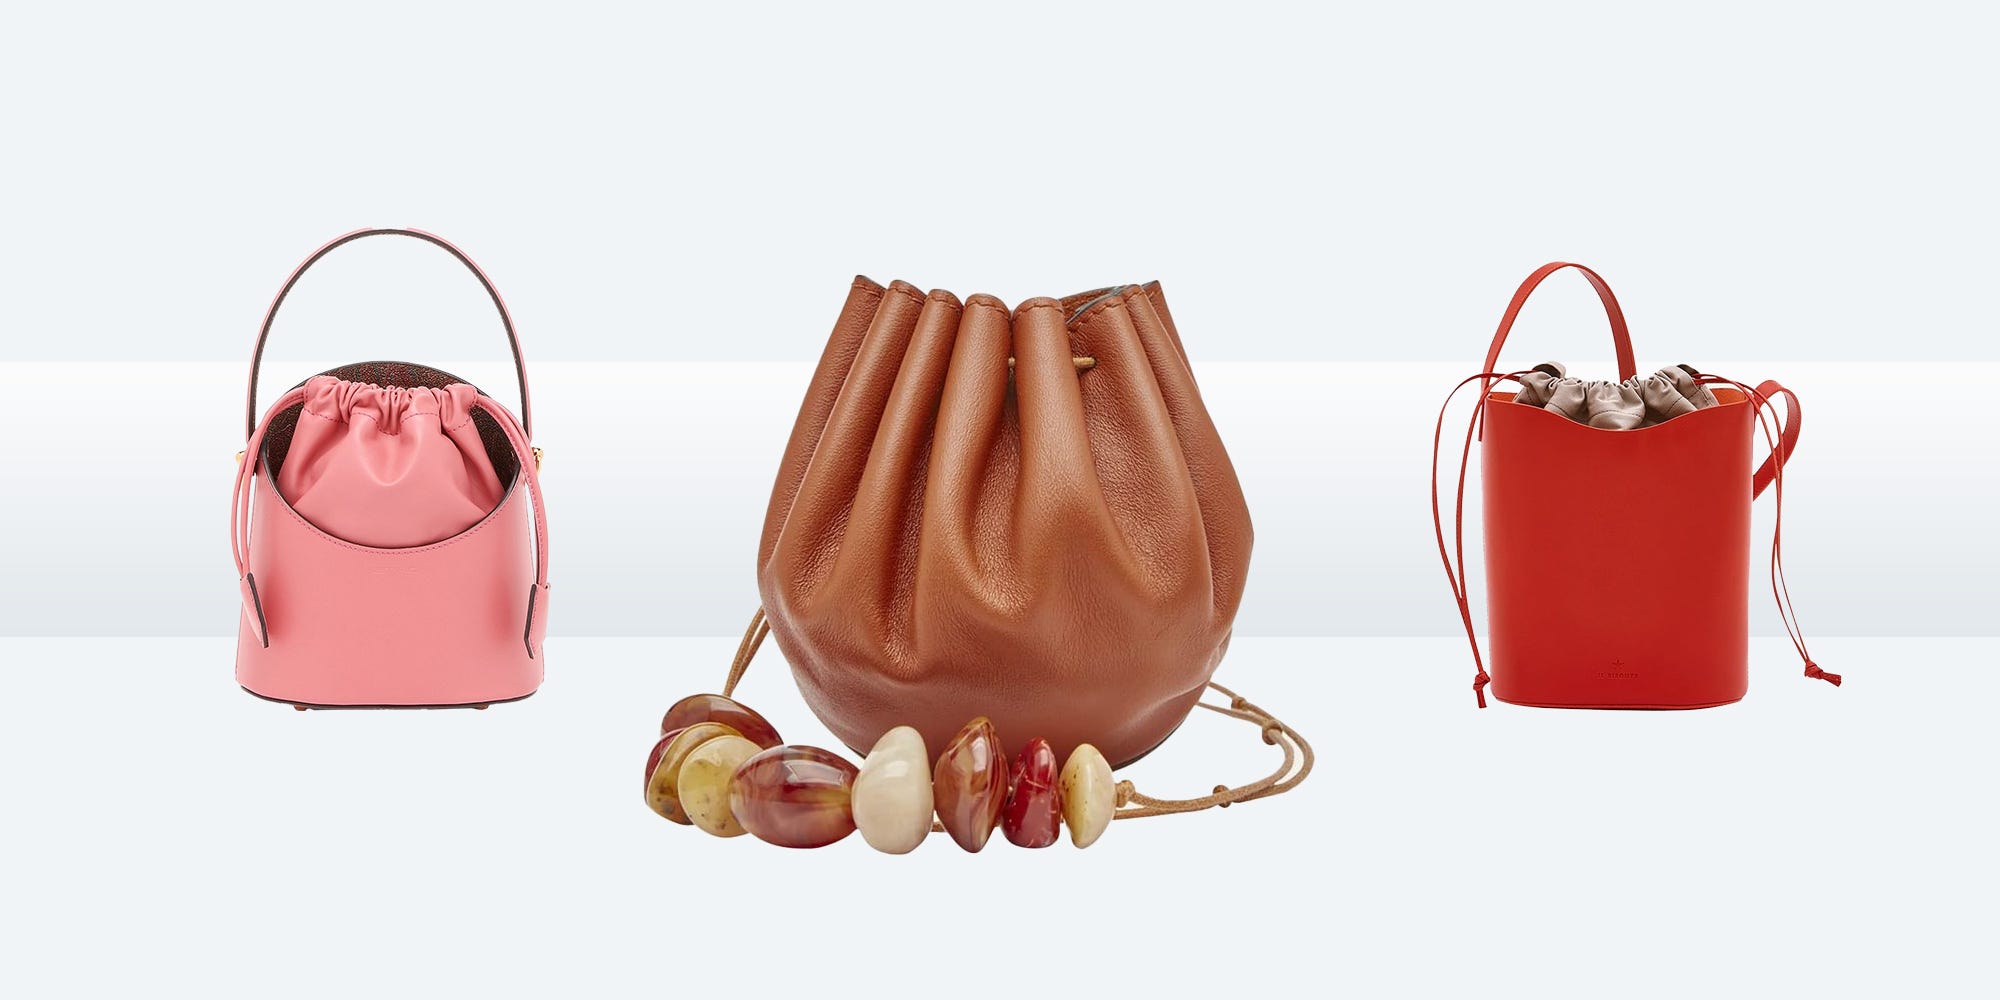 17 Stylish Bucket Bags That Deserves a Spot in Your Purse Collection